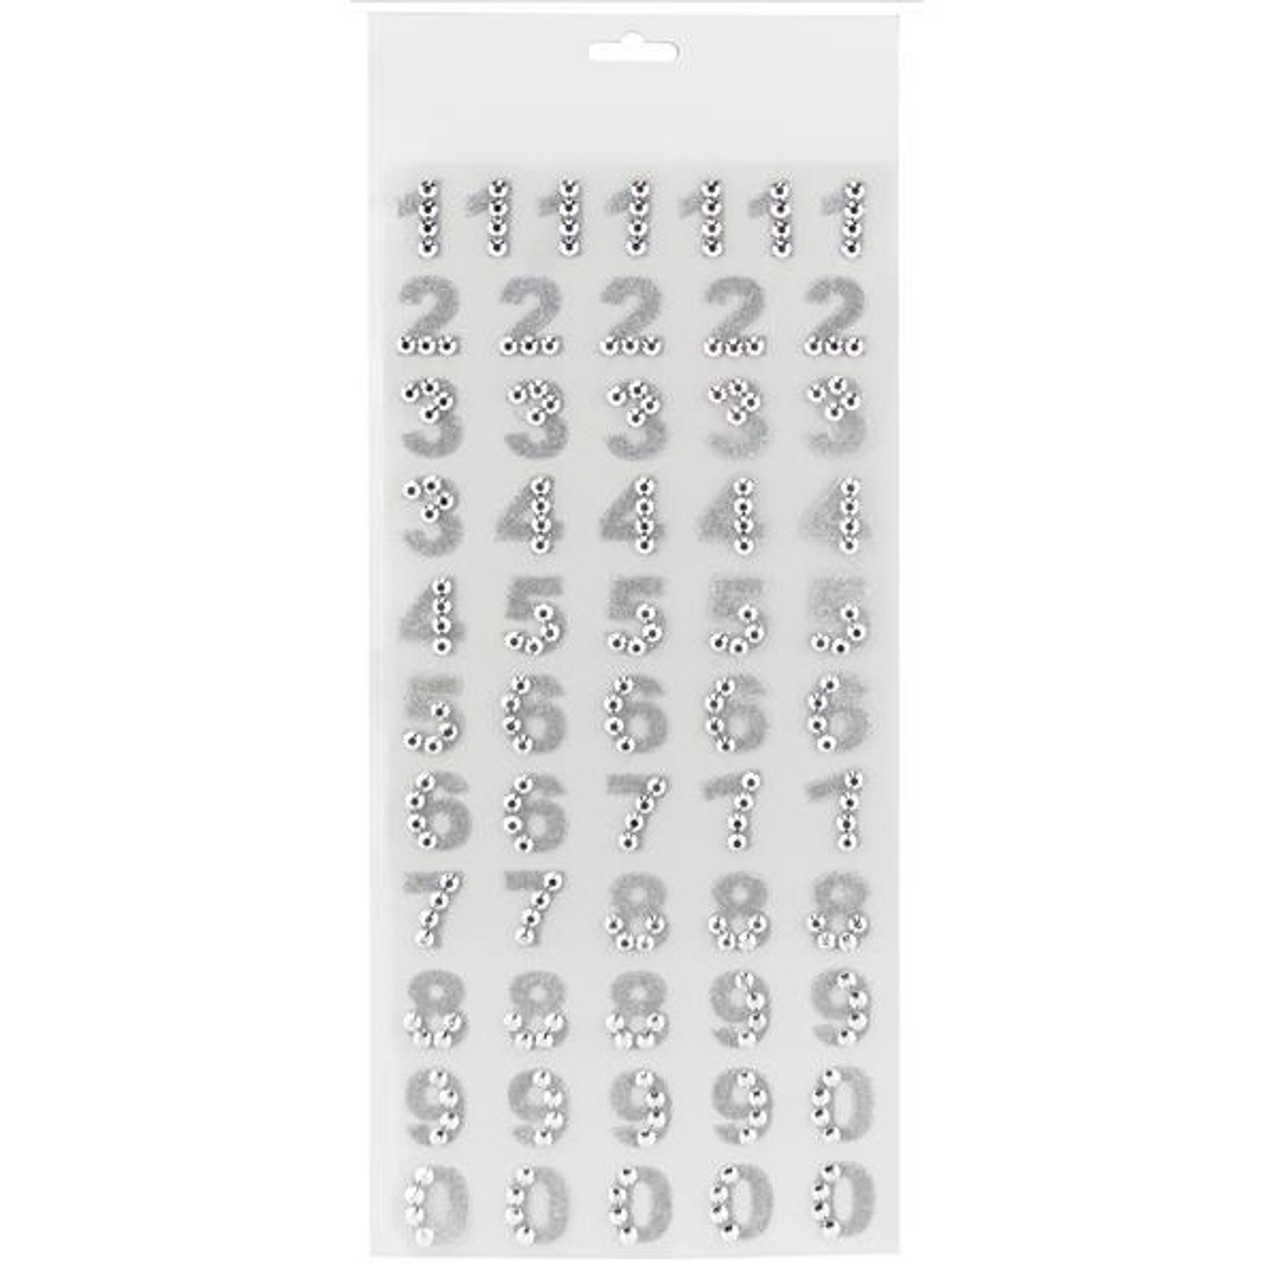 Rhinestone Number Stickers - Silver - Party Time, Inc.